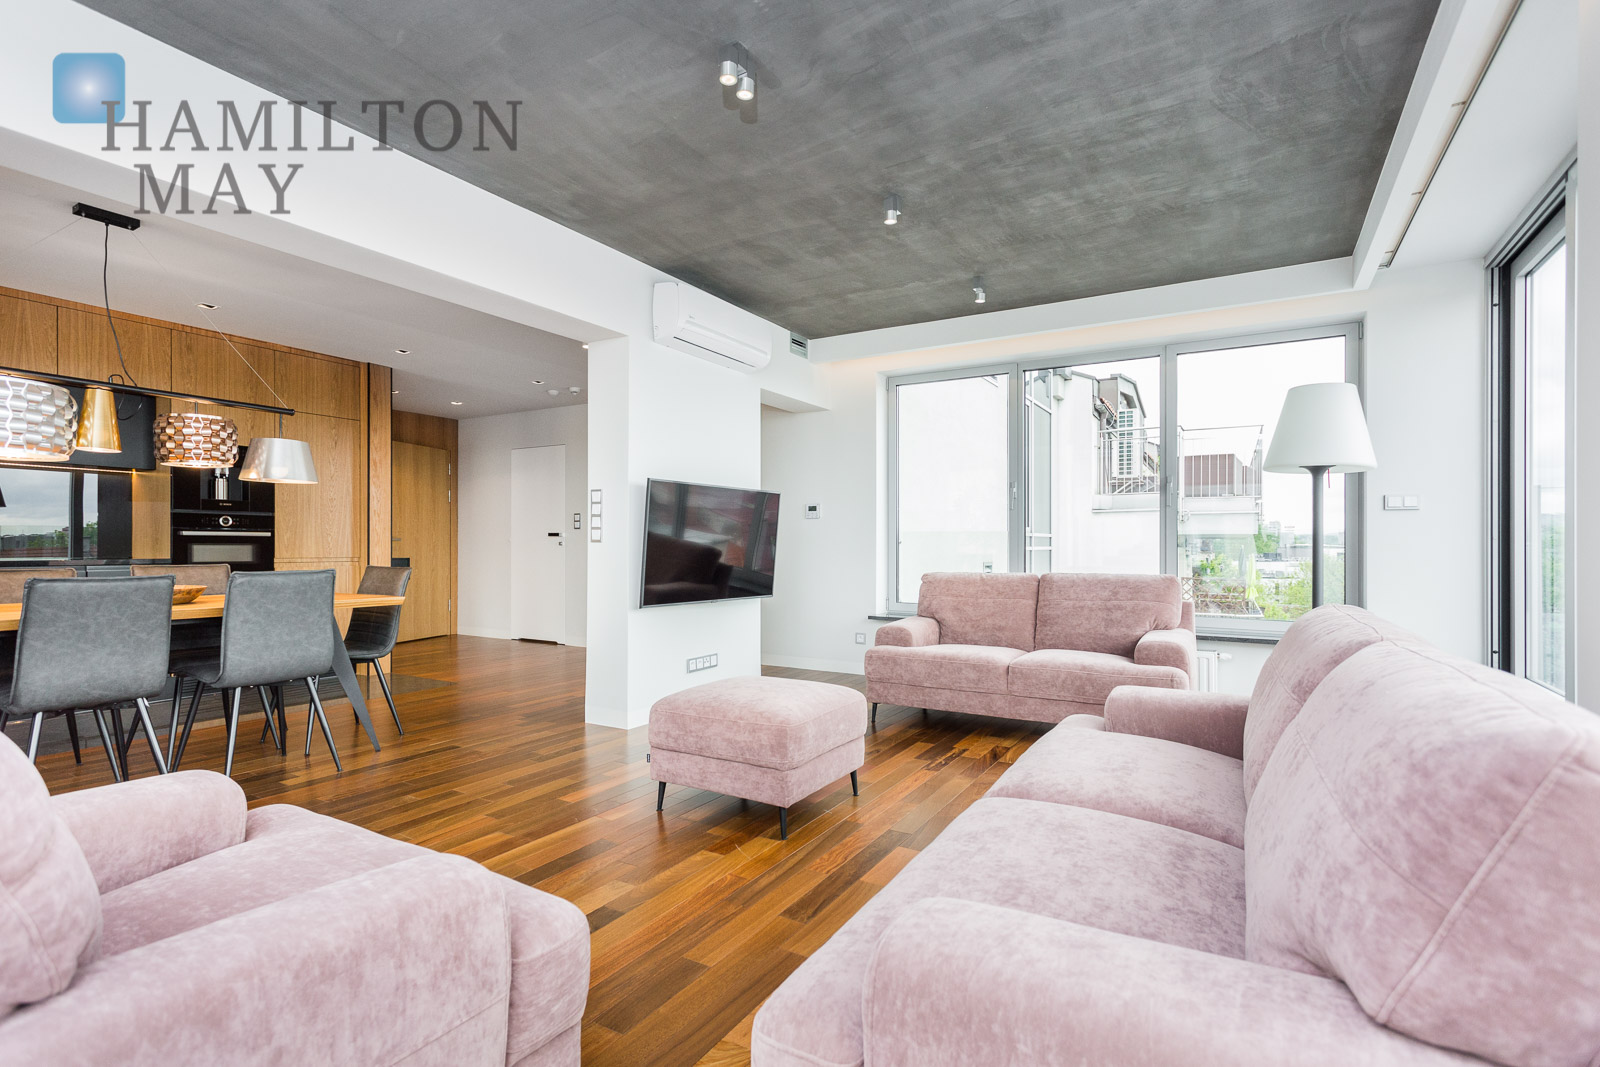 Luxurious One Bedroom Apartment With A Big Terrace And Beautiful View Over The Krakow S Skyline In A Modern Investment In Podgorze Jana Zamoyskiego Krakow For Rental Ref 14935 Hamilton May